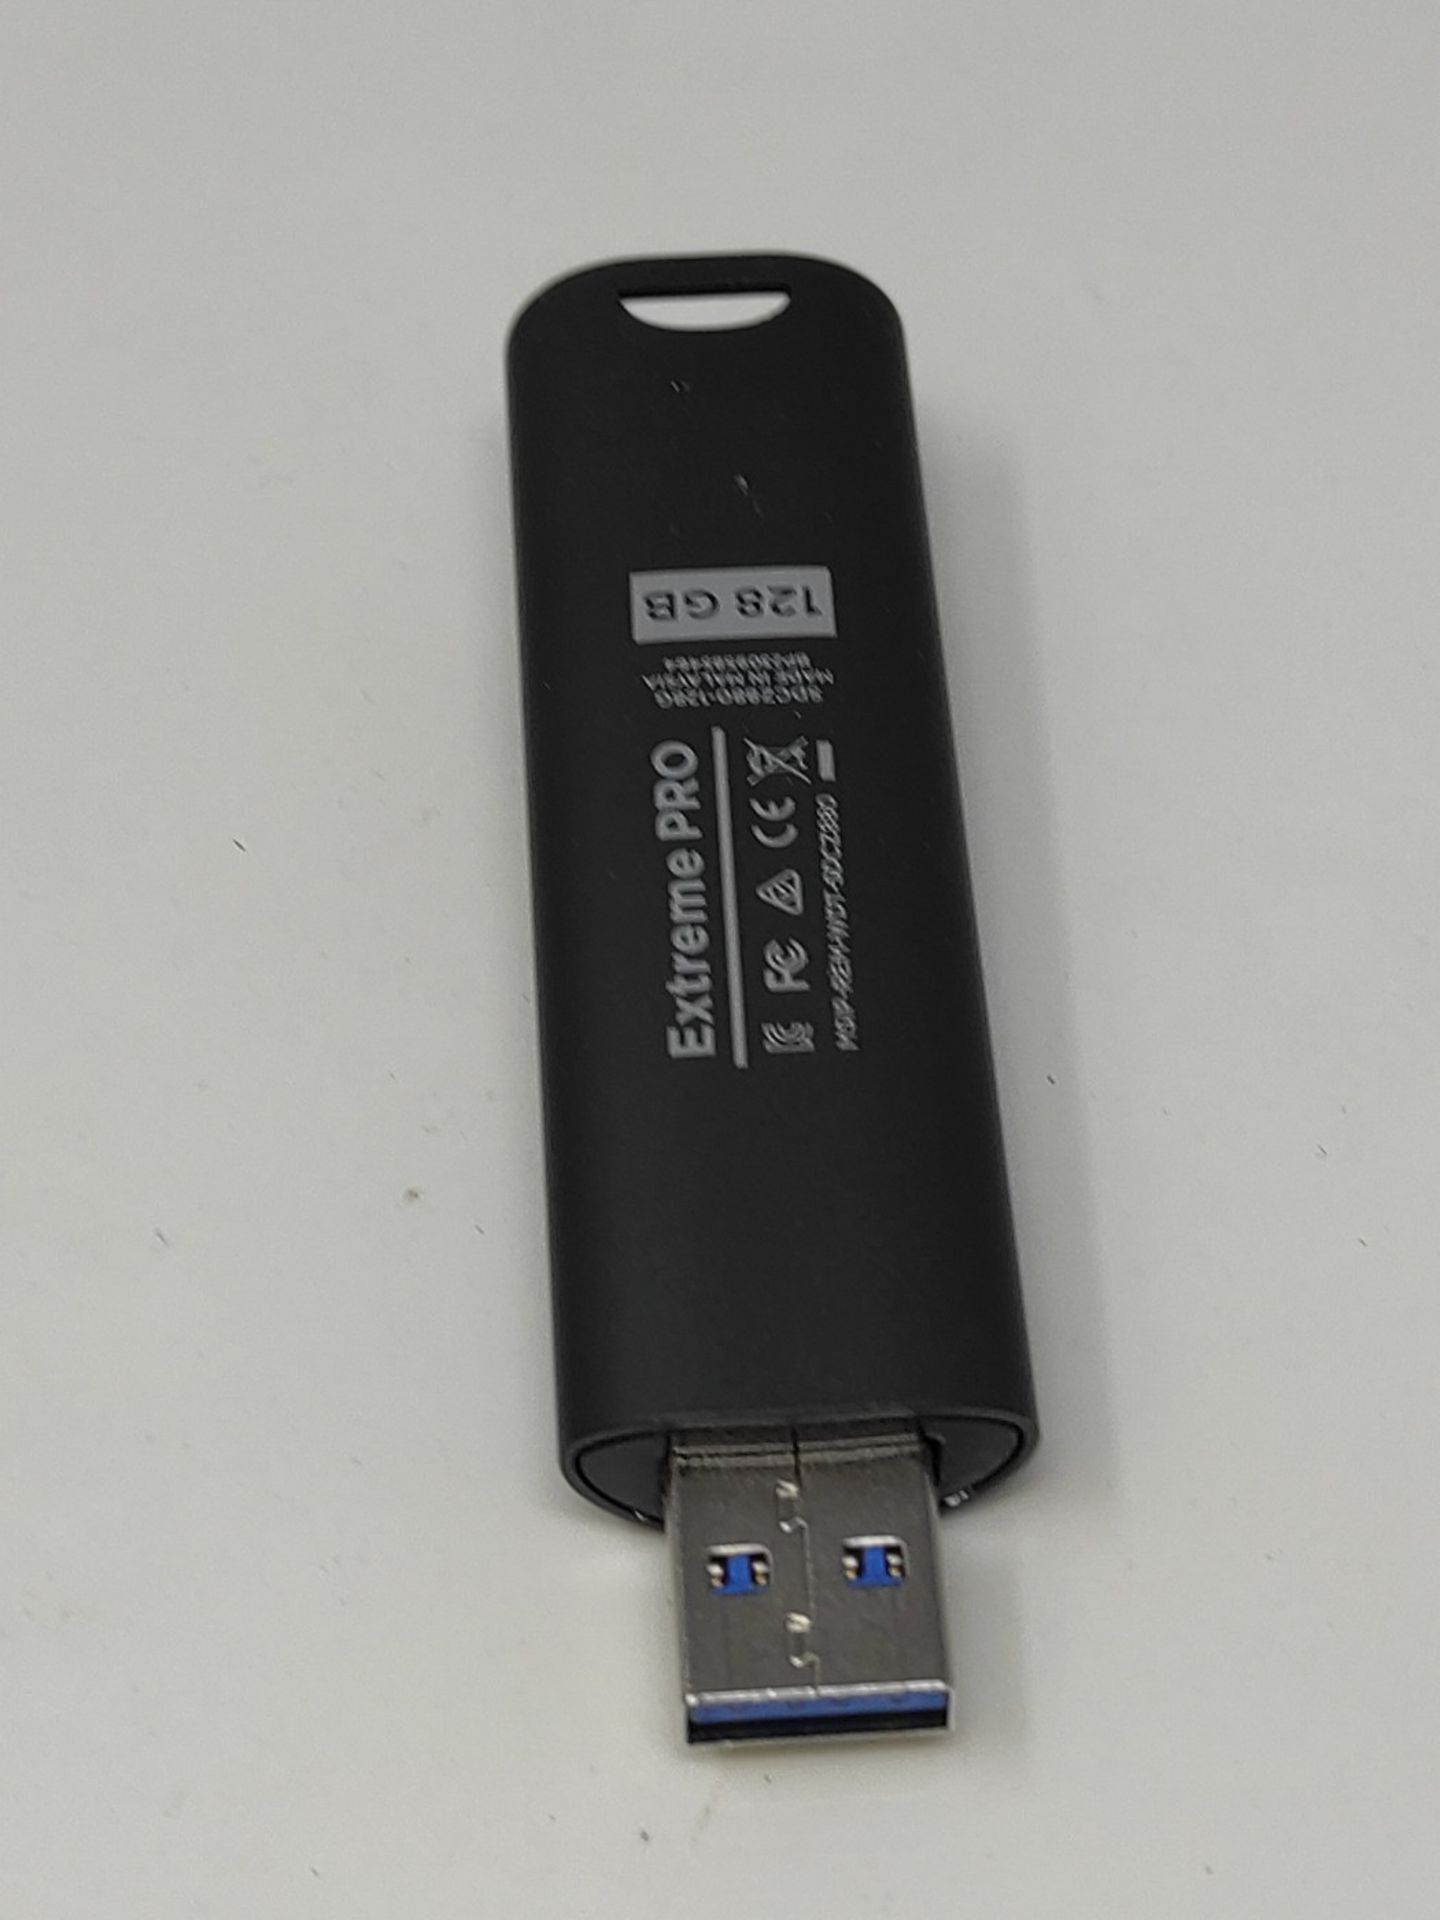 SanDisk Extreme PRO 128GB: a USB 3.2 SSD flash drive with read speeds of up to 420MB/s - Bild 2 aus 4